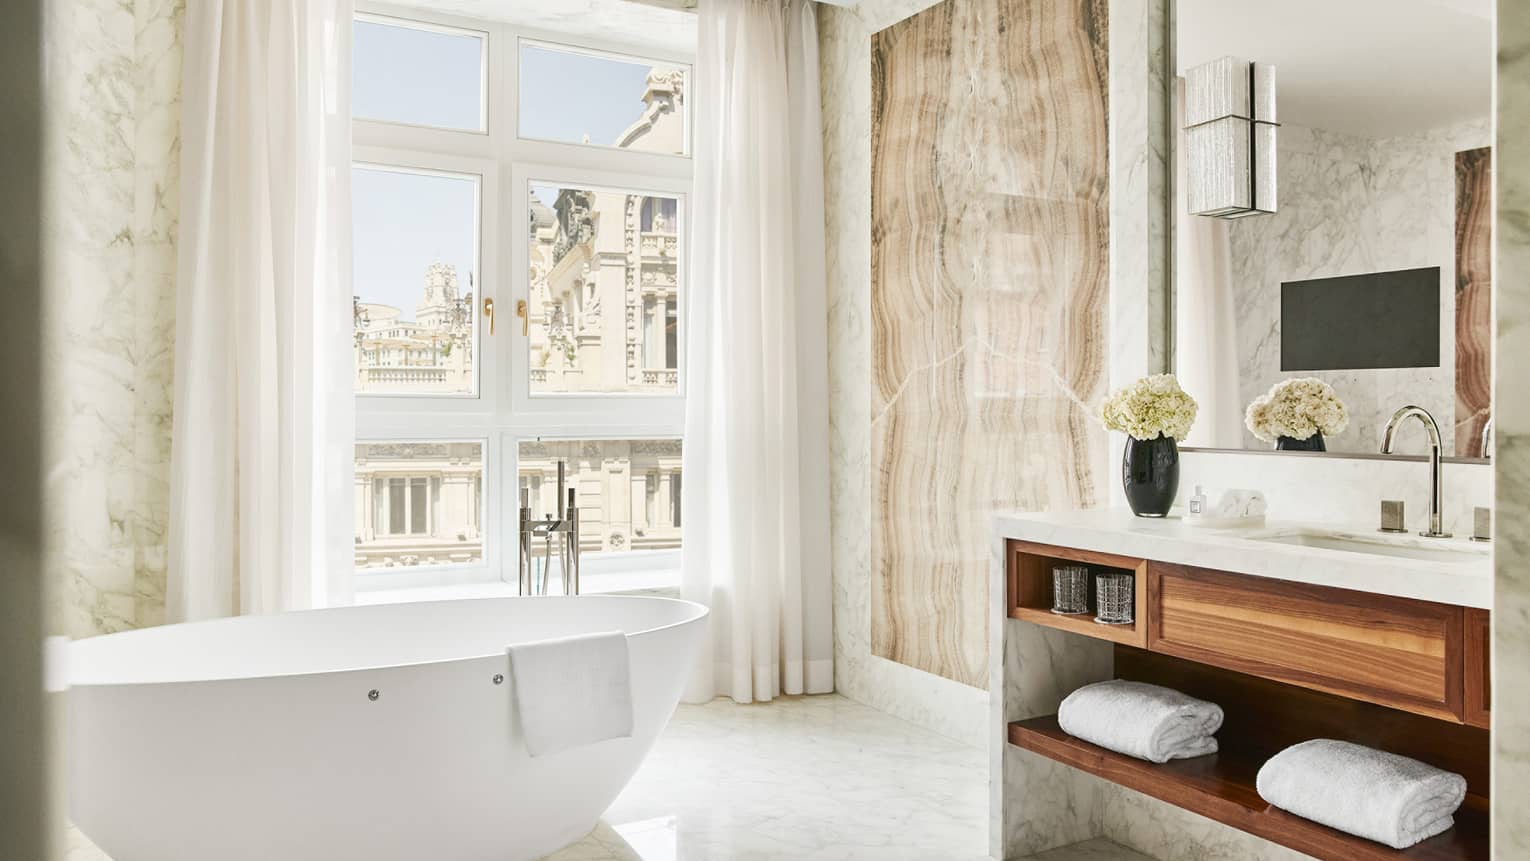 Bathroom with wall of windows, free-standing white tub, vanity with wooden shelves